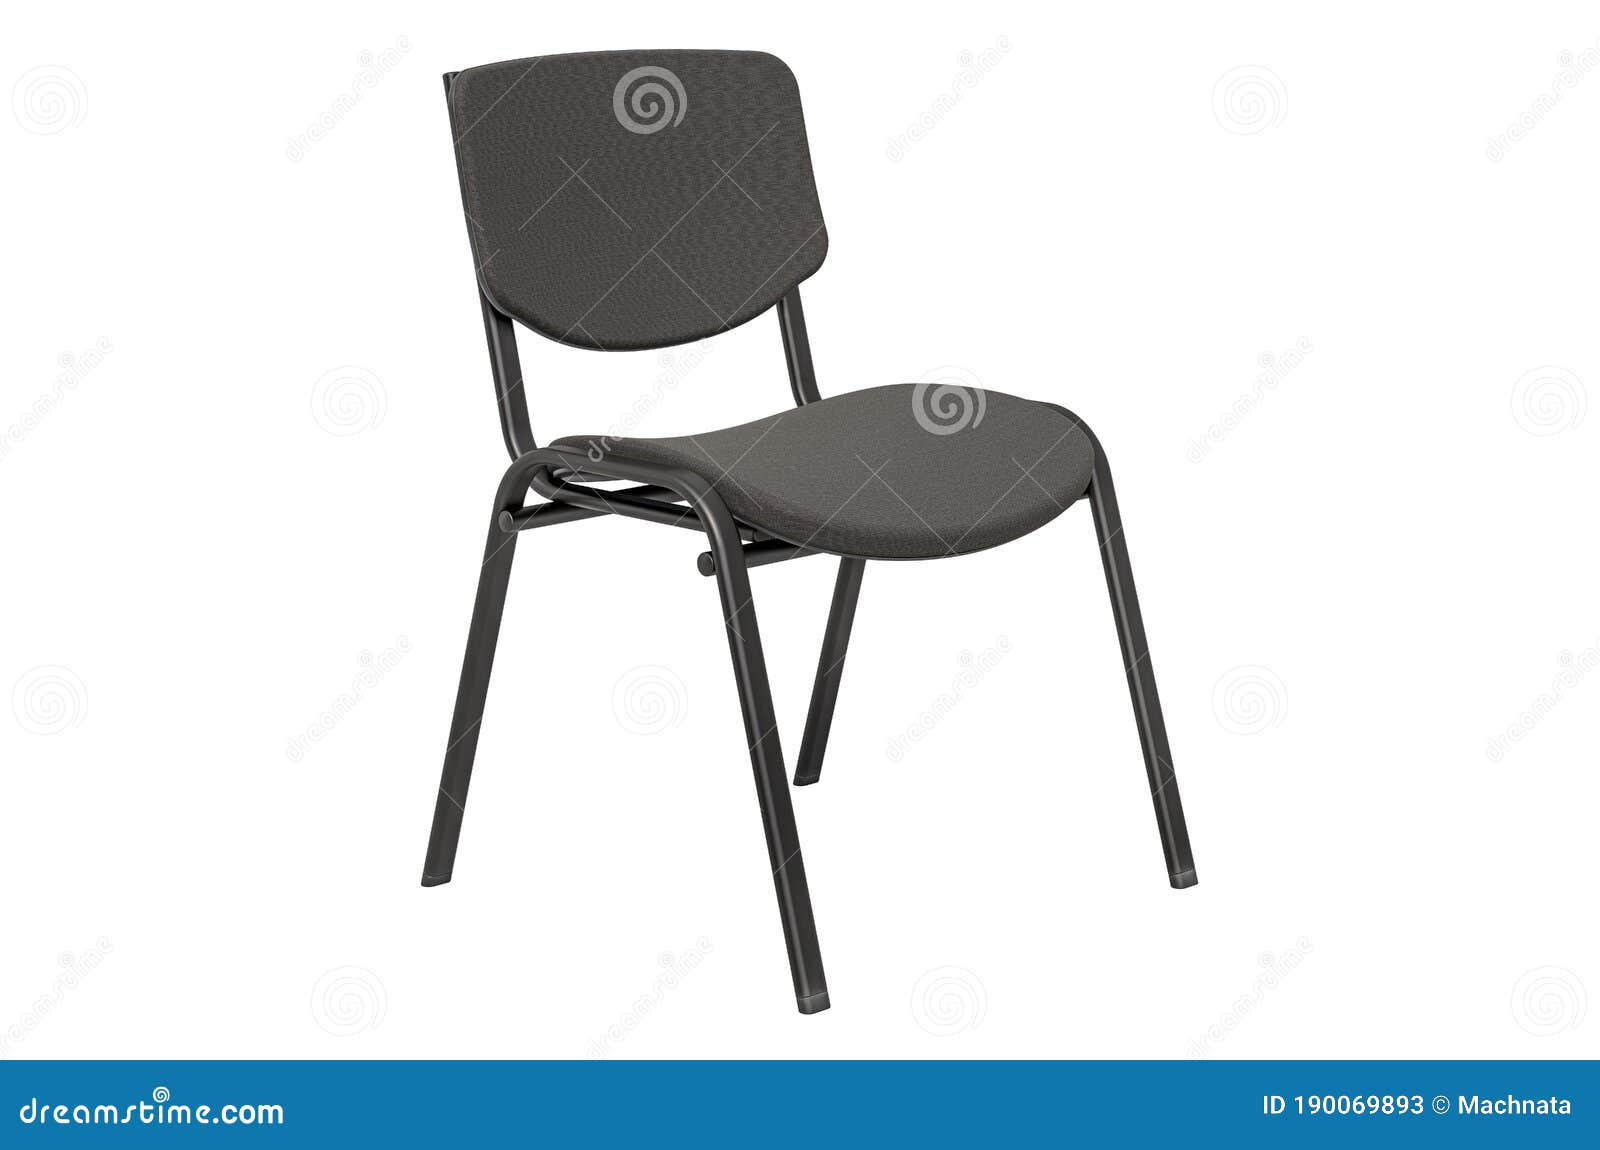 black office chair without wheels for meeting room or